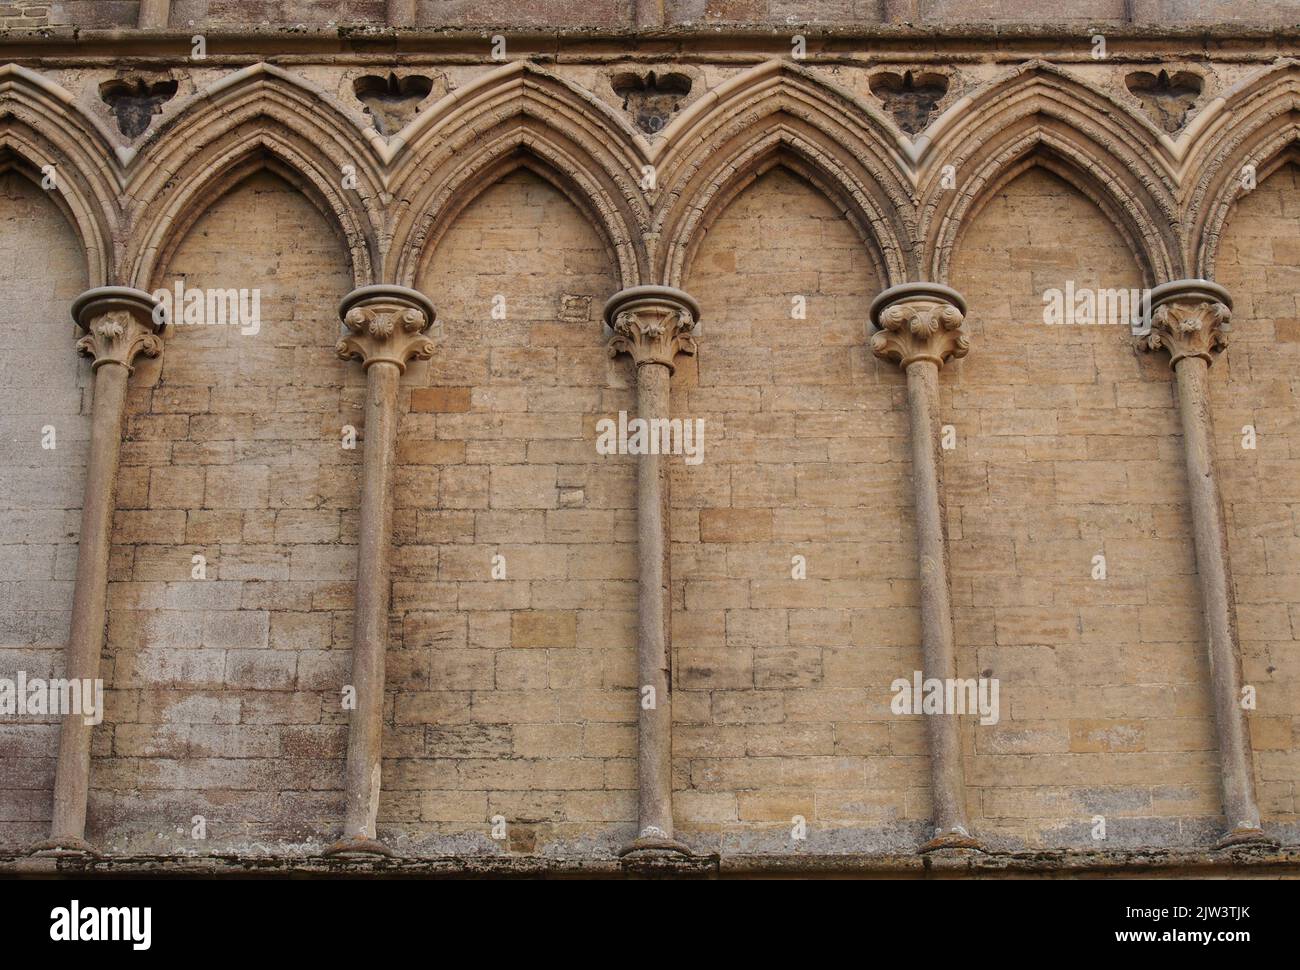 A view of parts of the detailed masonry carvings of Ely cathedral, Cambridgeshire showing the skill and intricate stone carvings in the walls Stock Photo